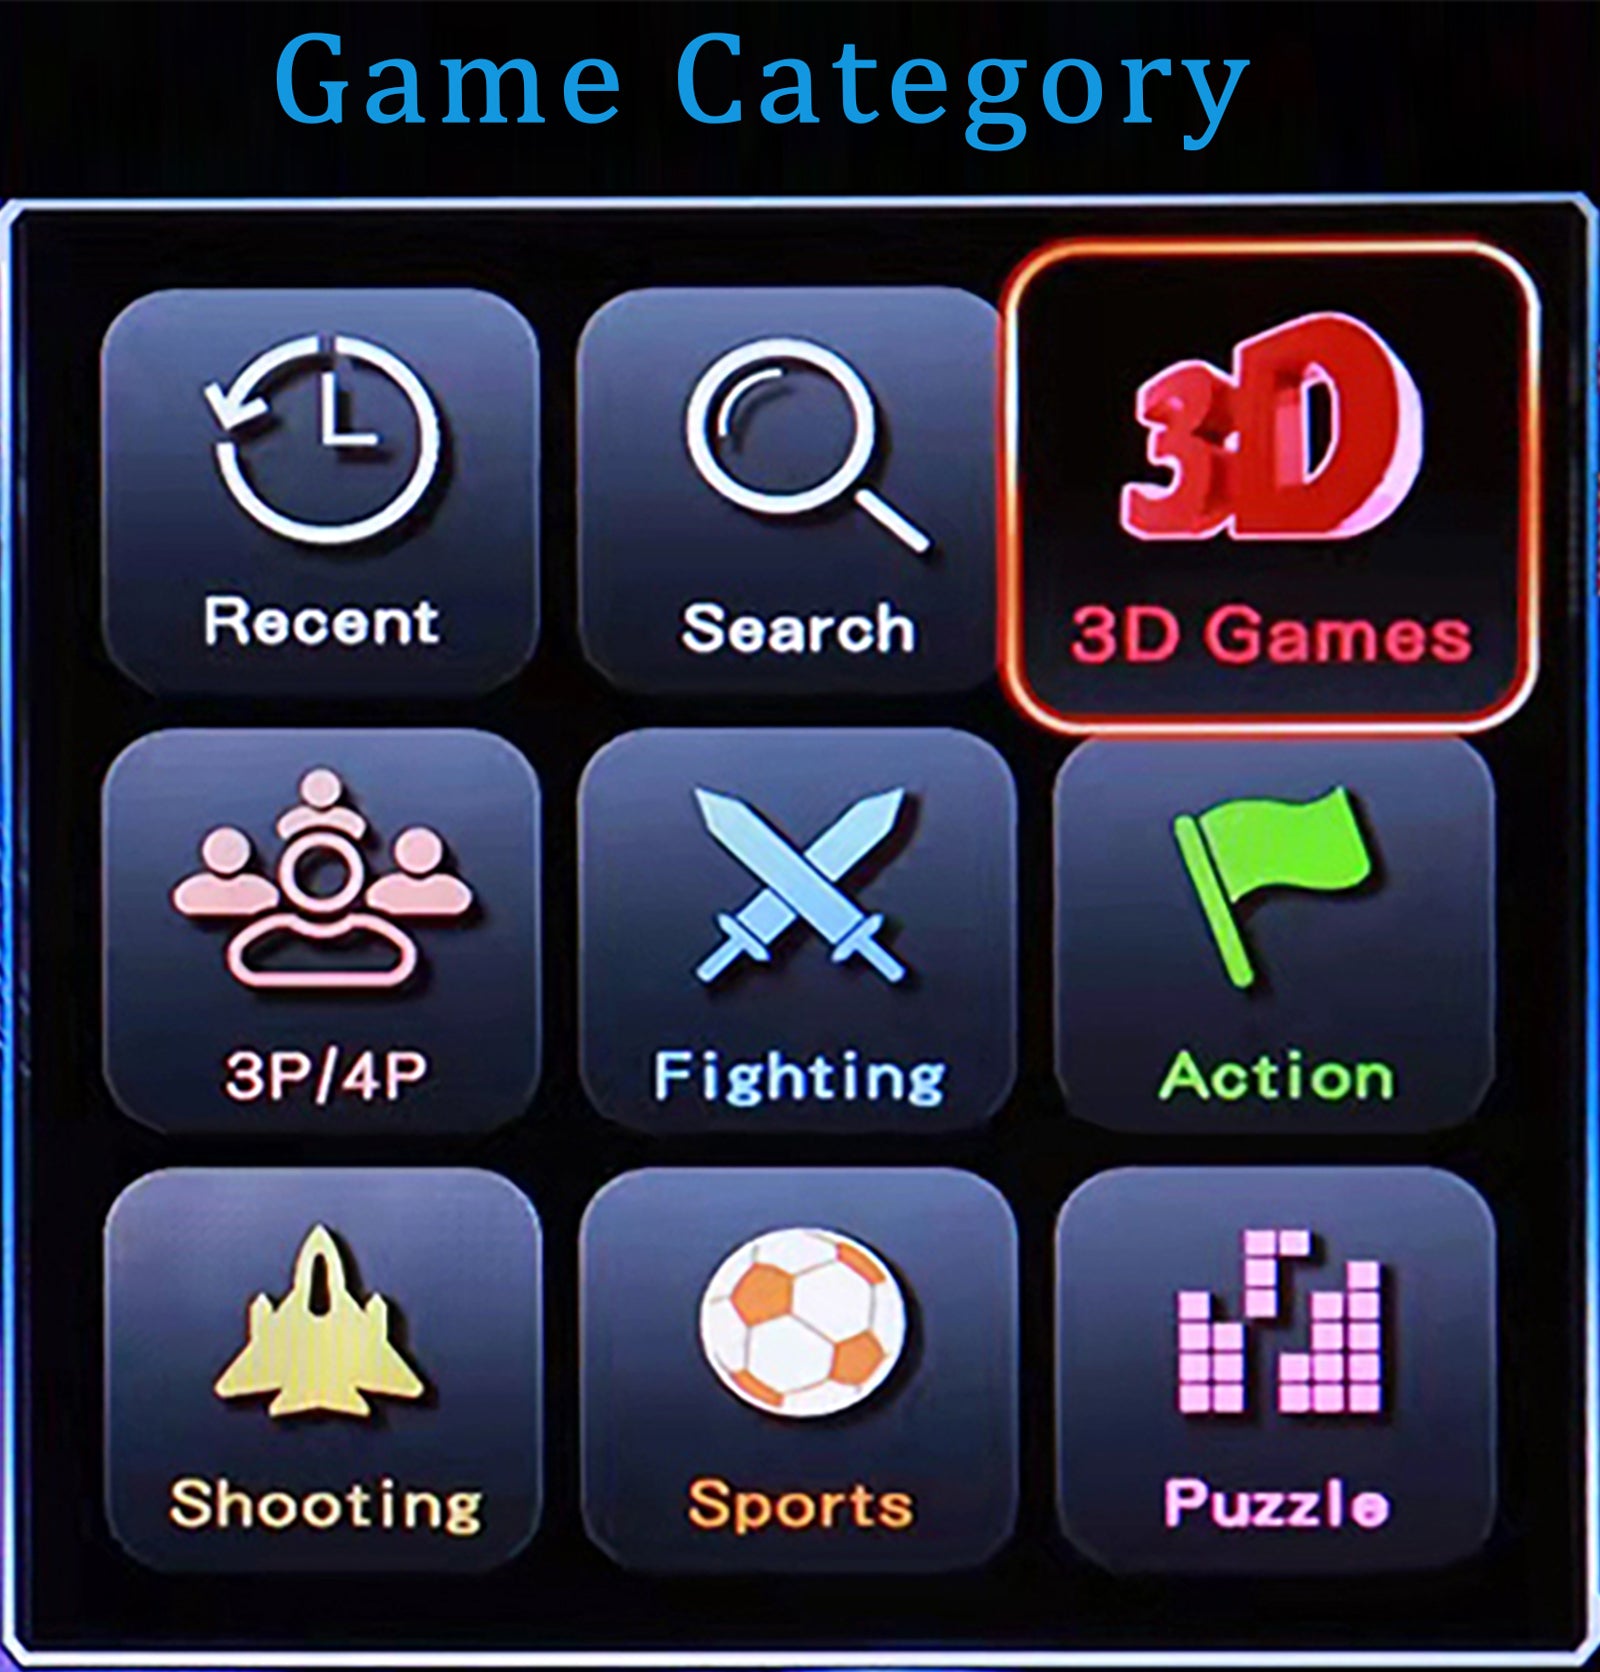 【19000 Games in 1】 3D+ Games- Support 3D Games,  1280x720,Search/Save/Hide/Pause Games, Favorite List, 4 Players Online Game